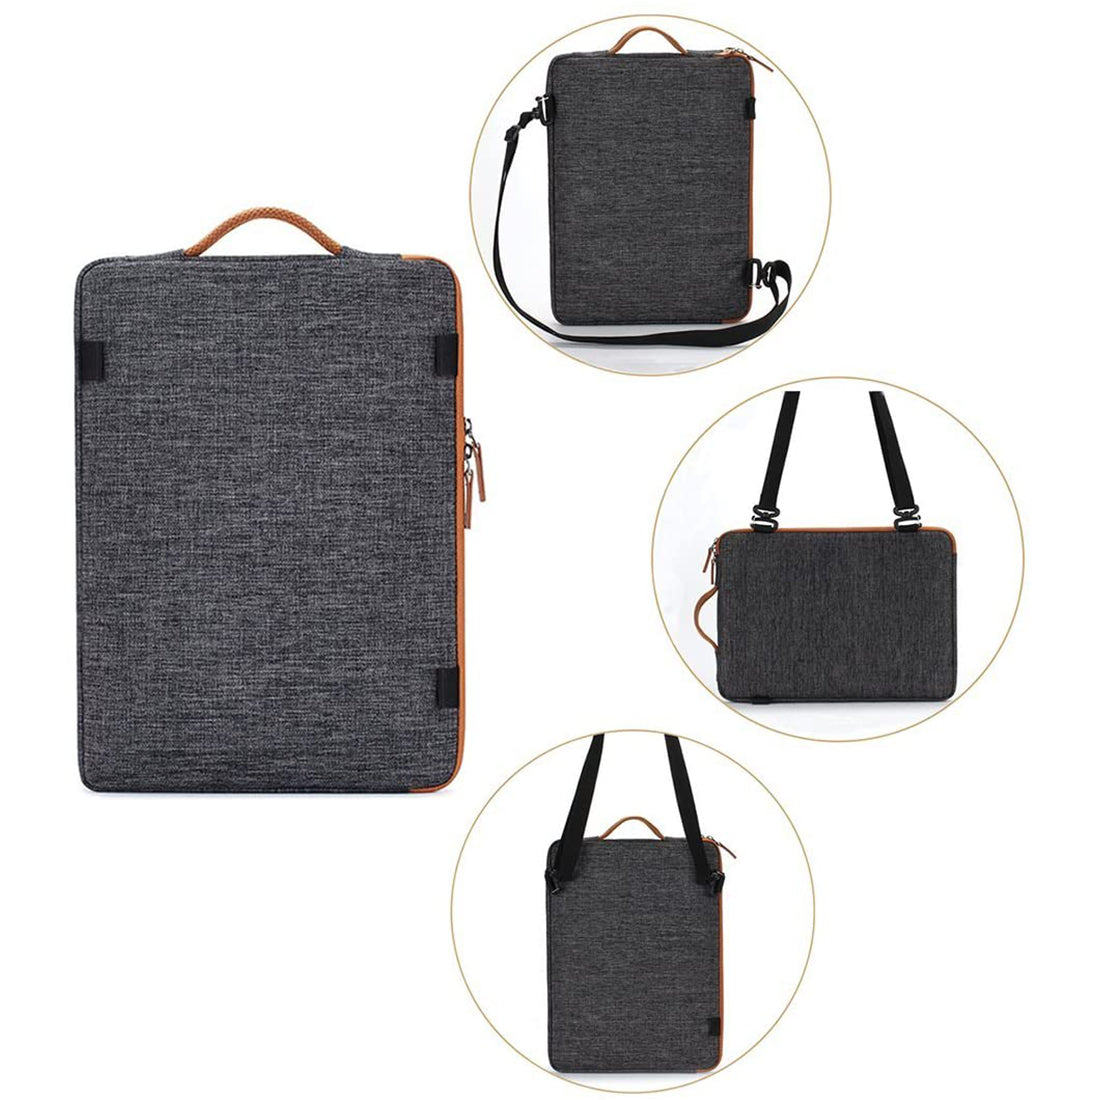 Domiso 11 13 14 15.6 17.3 Inch Waterproof Laptop Bag Polyester With Usb Charging Port Headphone Hole Notebook Laptop Sleeve